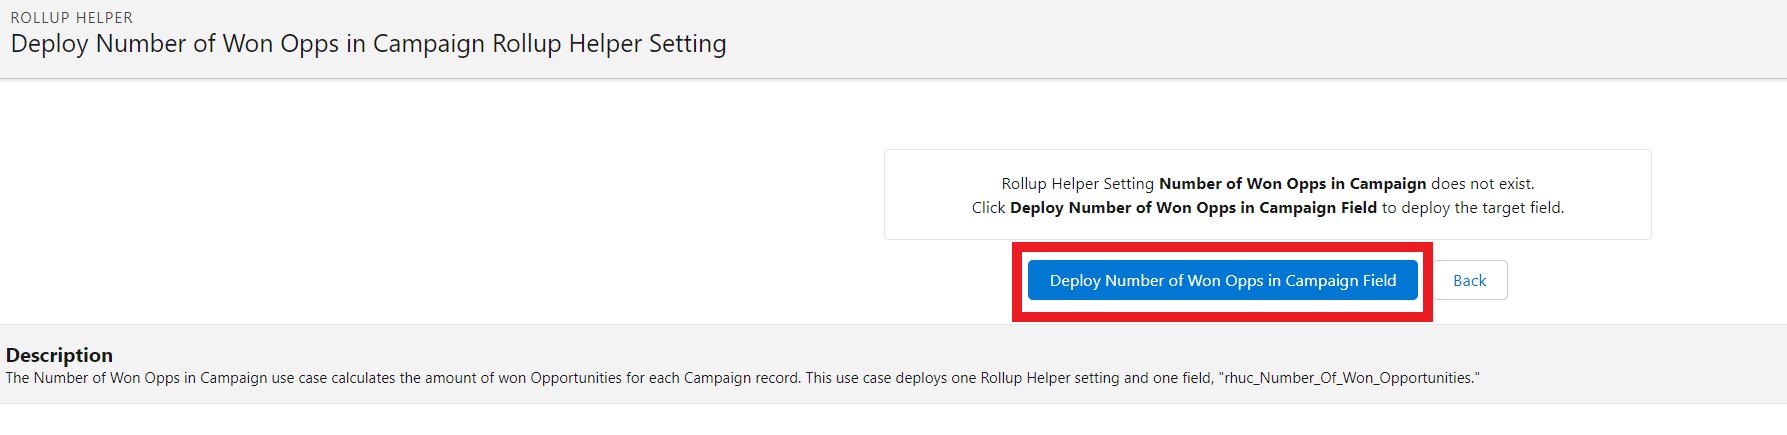 Number of Won Opps in Campaign run rollup deploy field